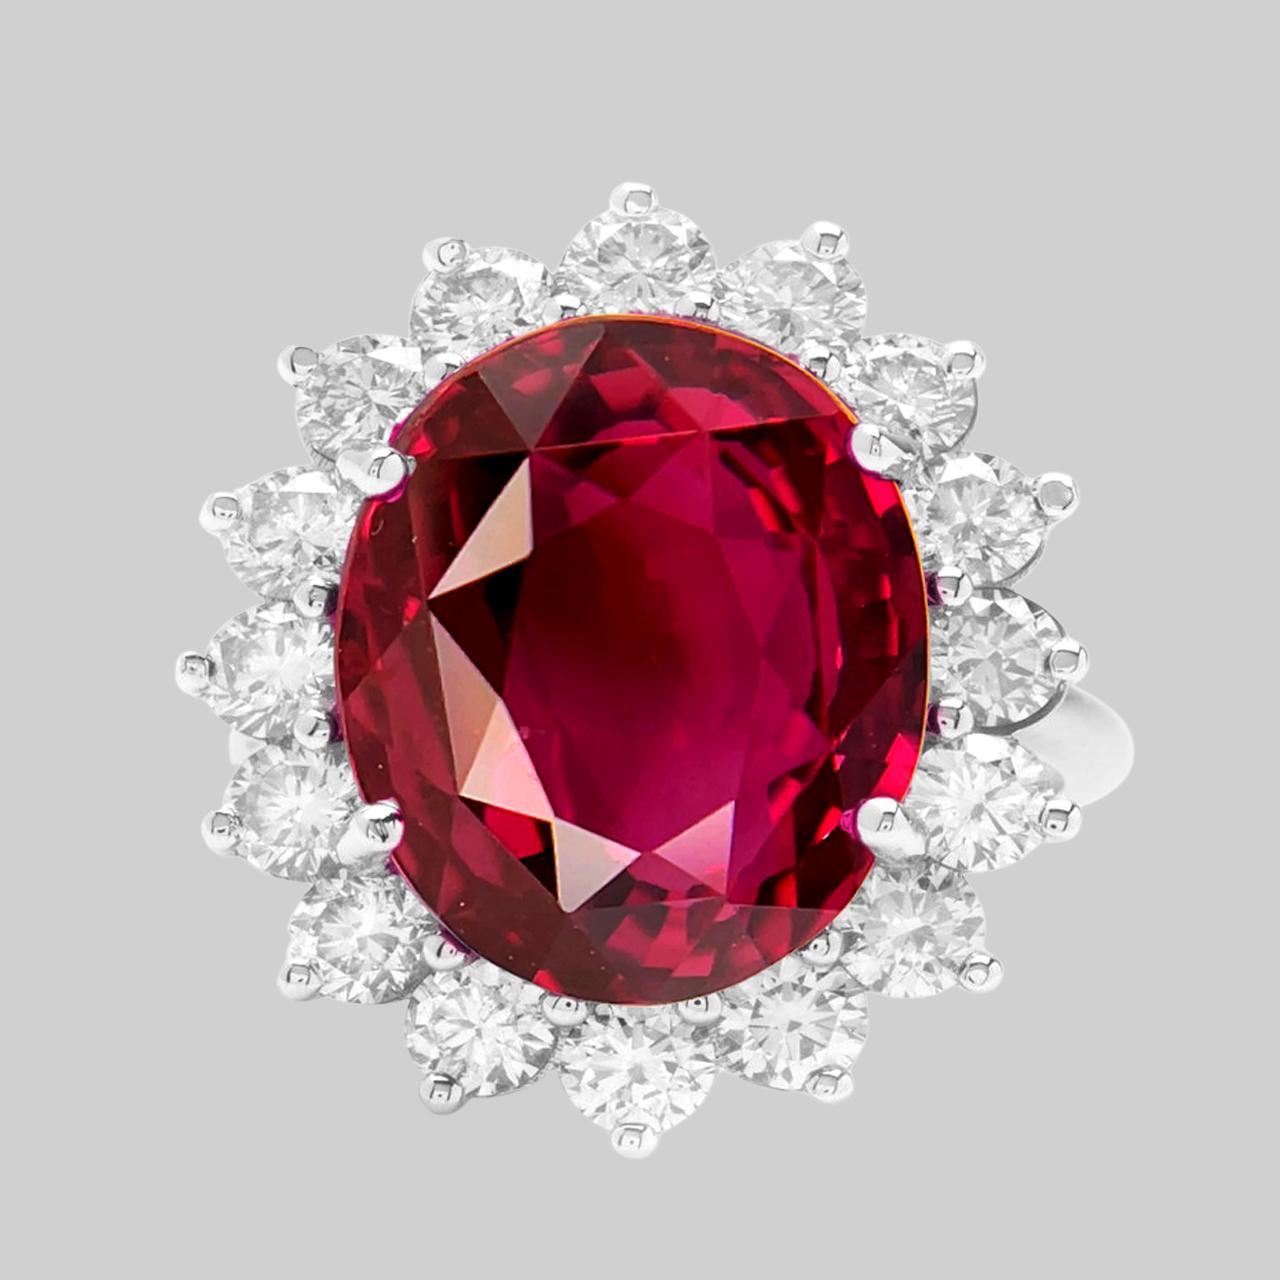 A truly magnificent classic ring. The oval shaped BURMESE ruby center stone is surrounded by round diamonds in a handmade platinum setting
Ruby total weight 12 carats
Diamond total weight 1 carats
Ring size 7 sizing options are available
Appraisal